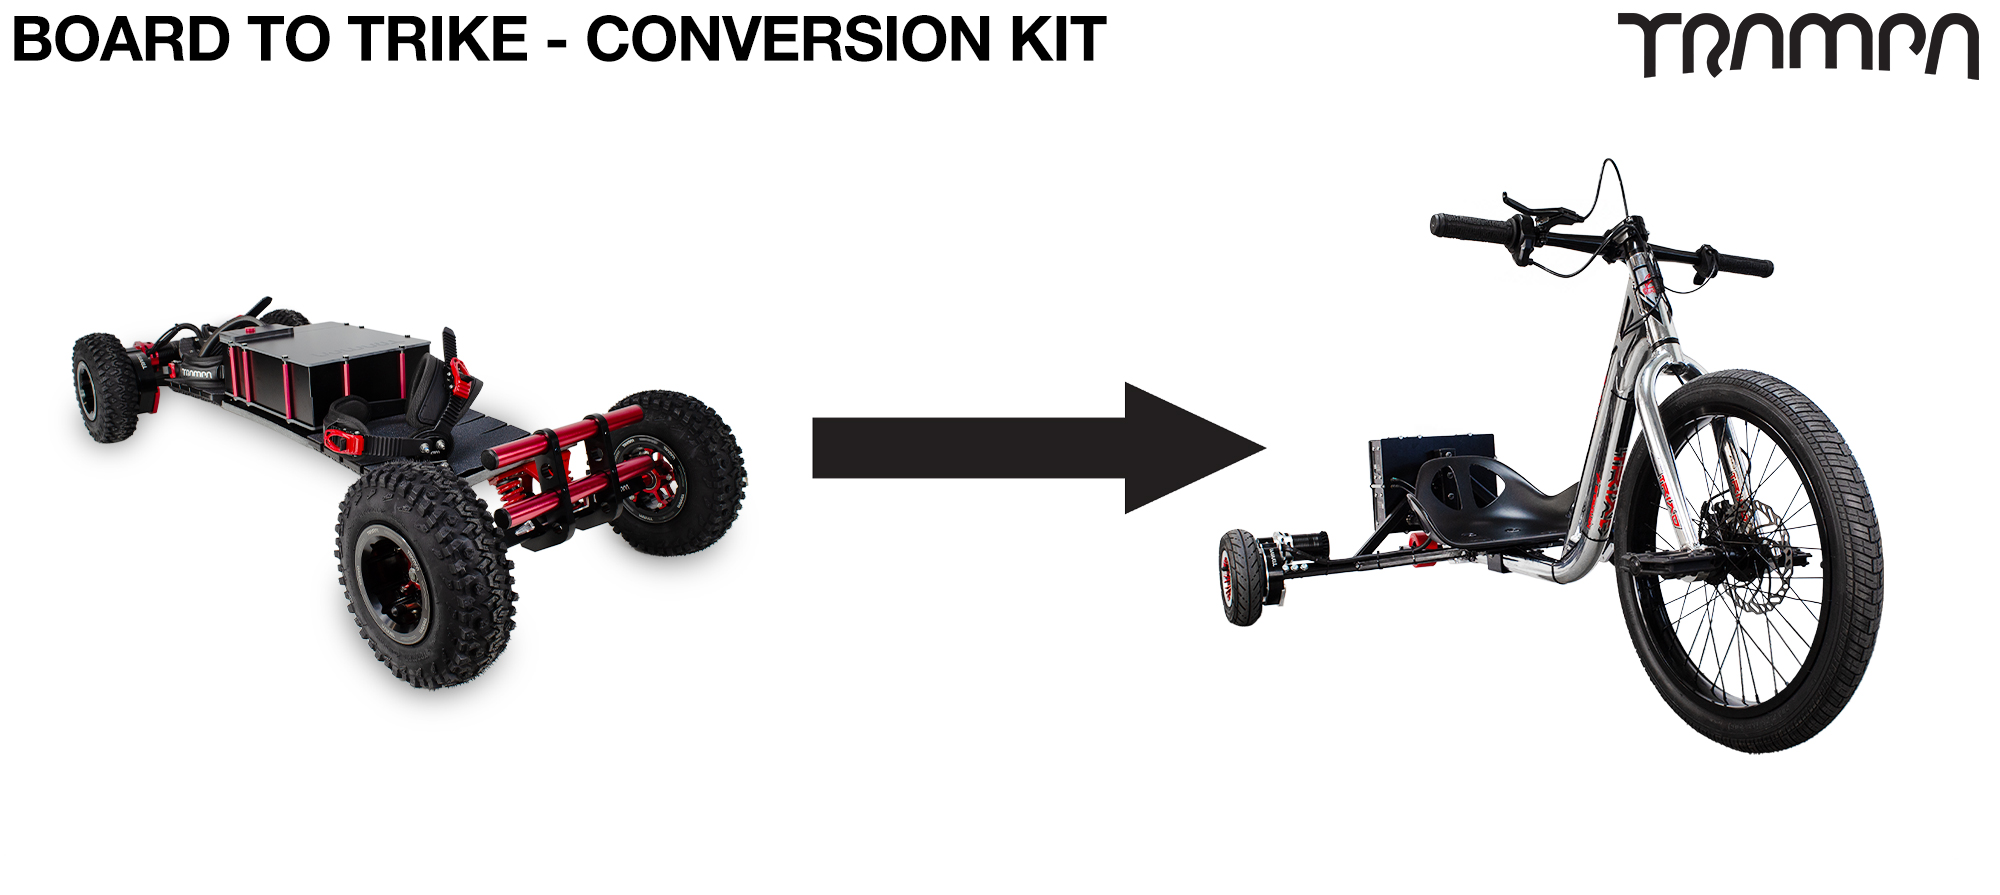 Dirt-E-Trike Complete Board conversion kit will allow you to convert your existing Trampa Electric Mountain Board into a DIRT-E-TRIKE